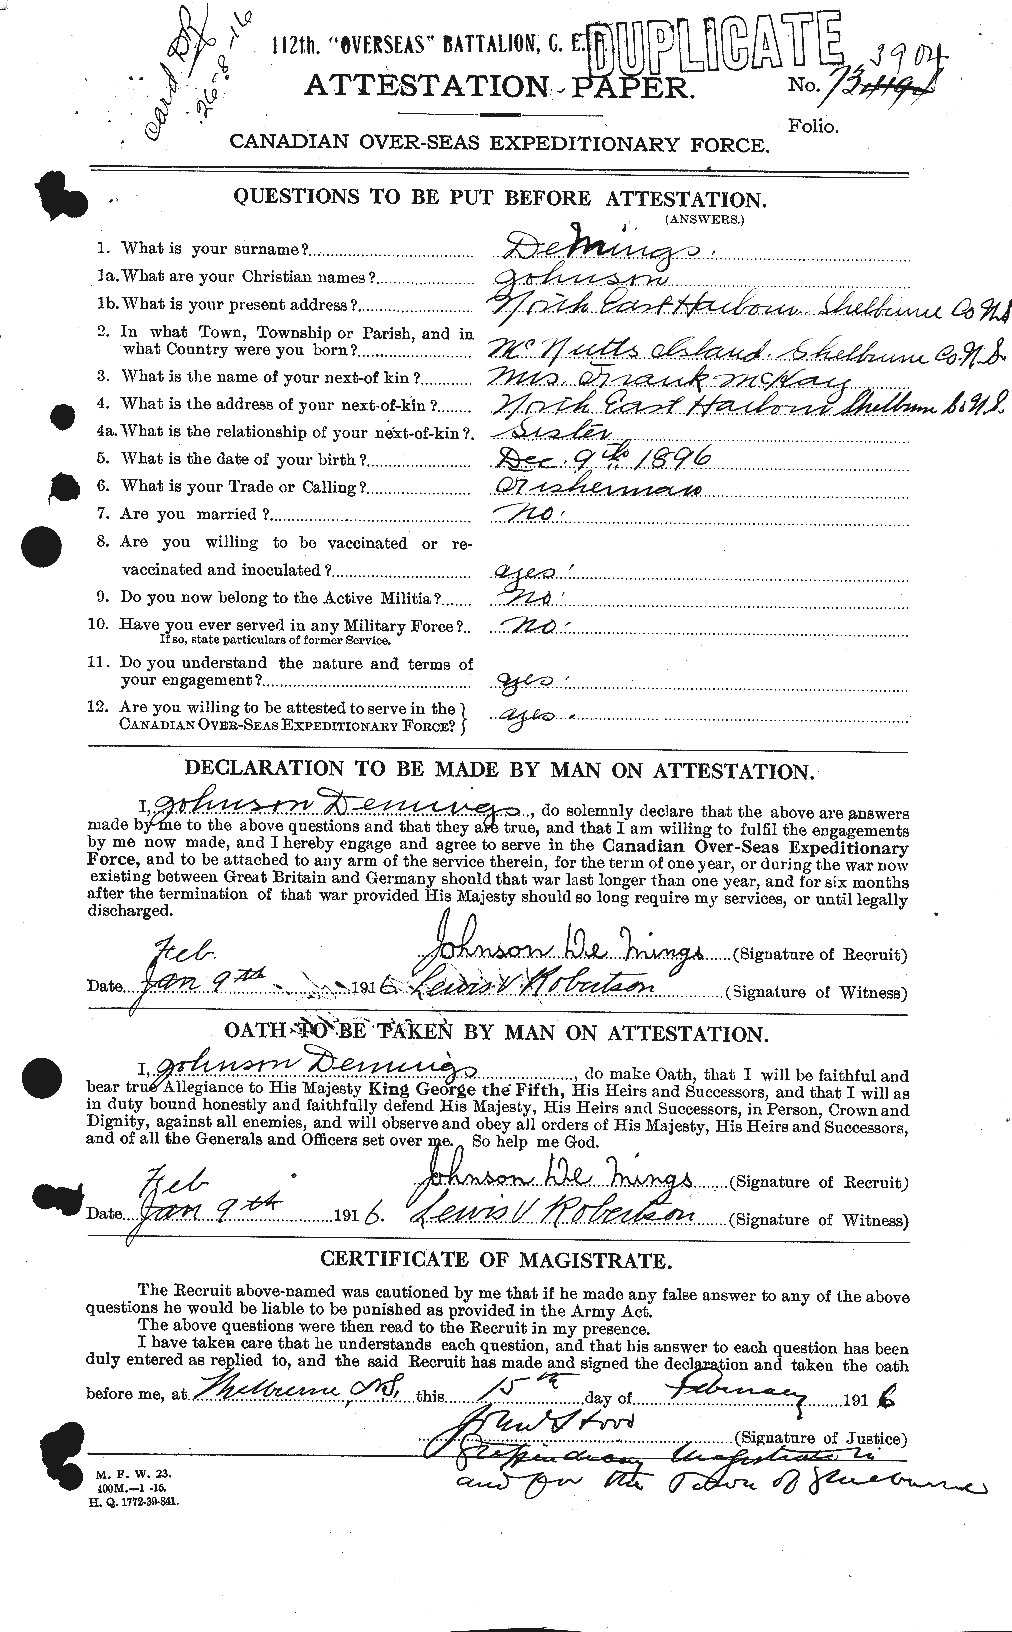 Personnel Records of the First World War - CEF 286772a